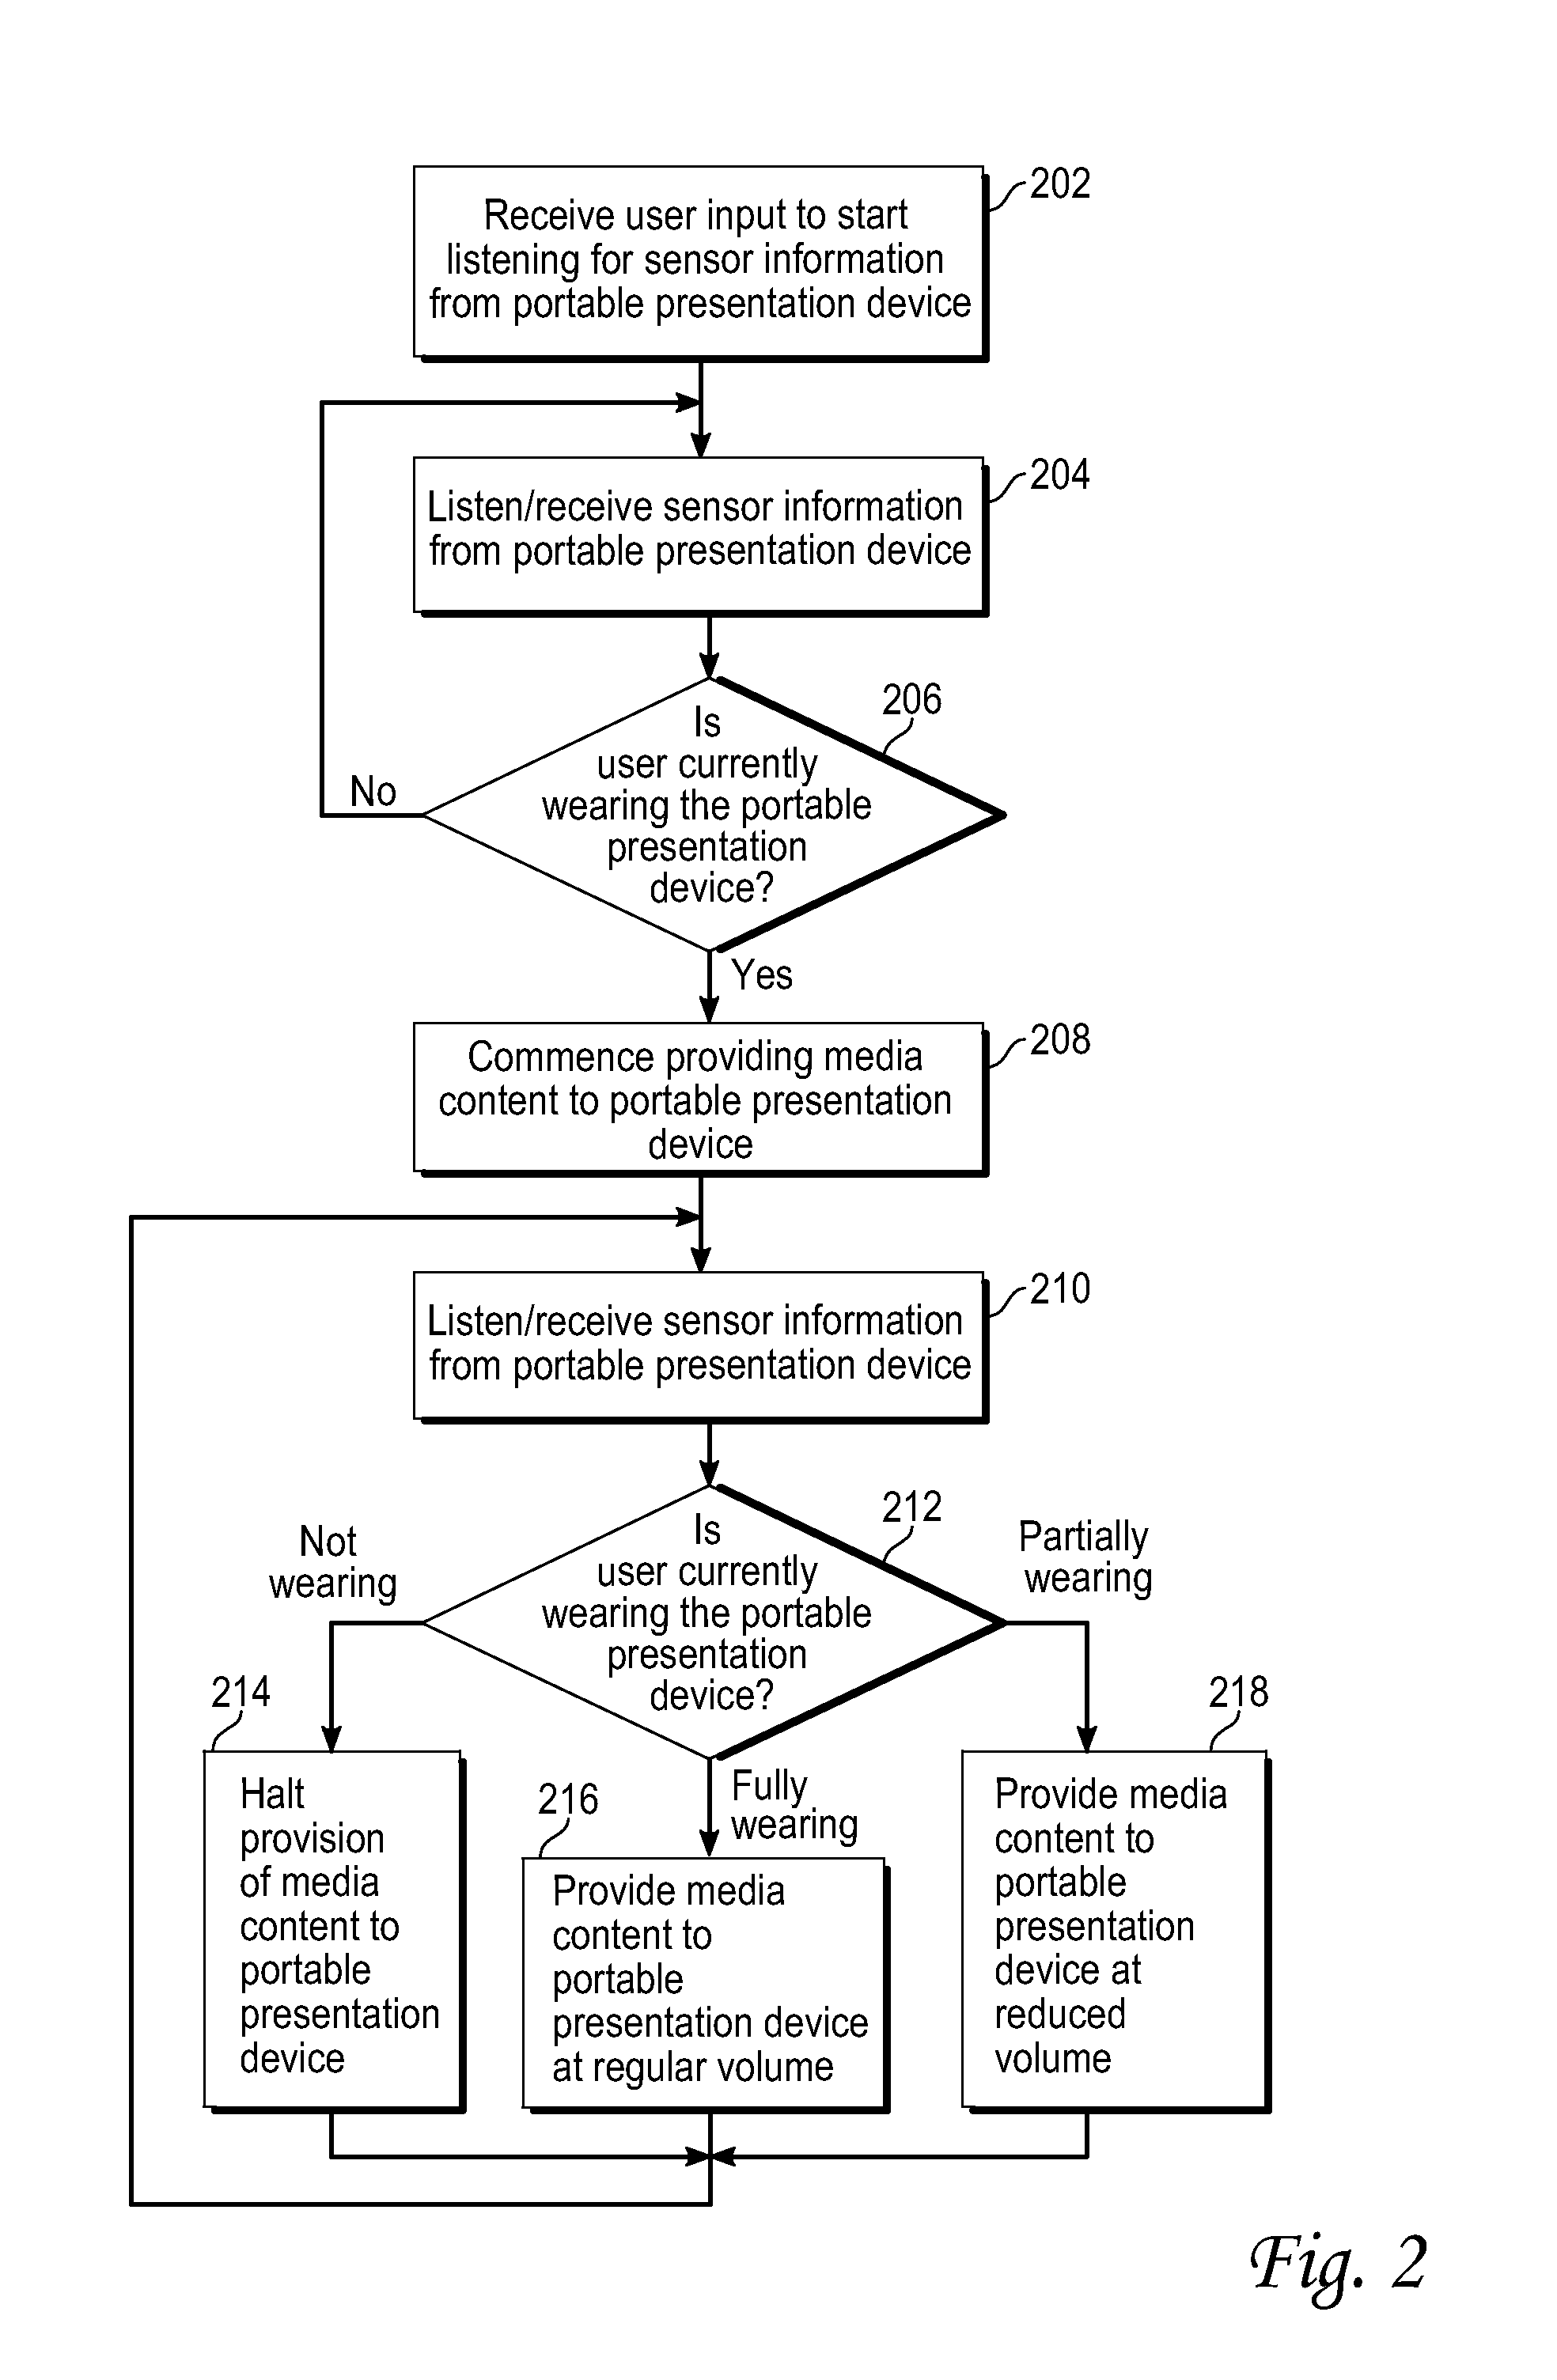 Controlling operation of a media device based upon whether a presentation device is currently being worn by a user